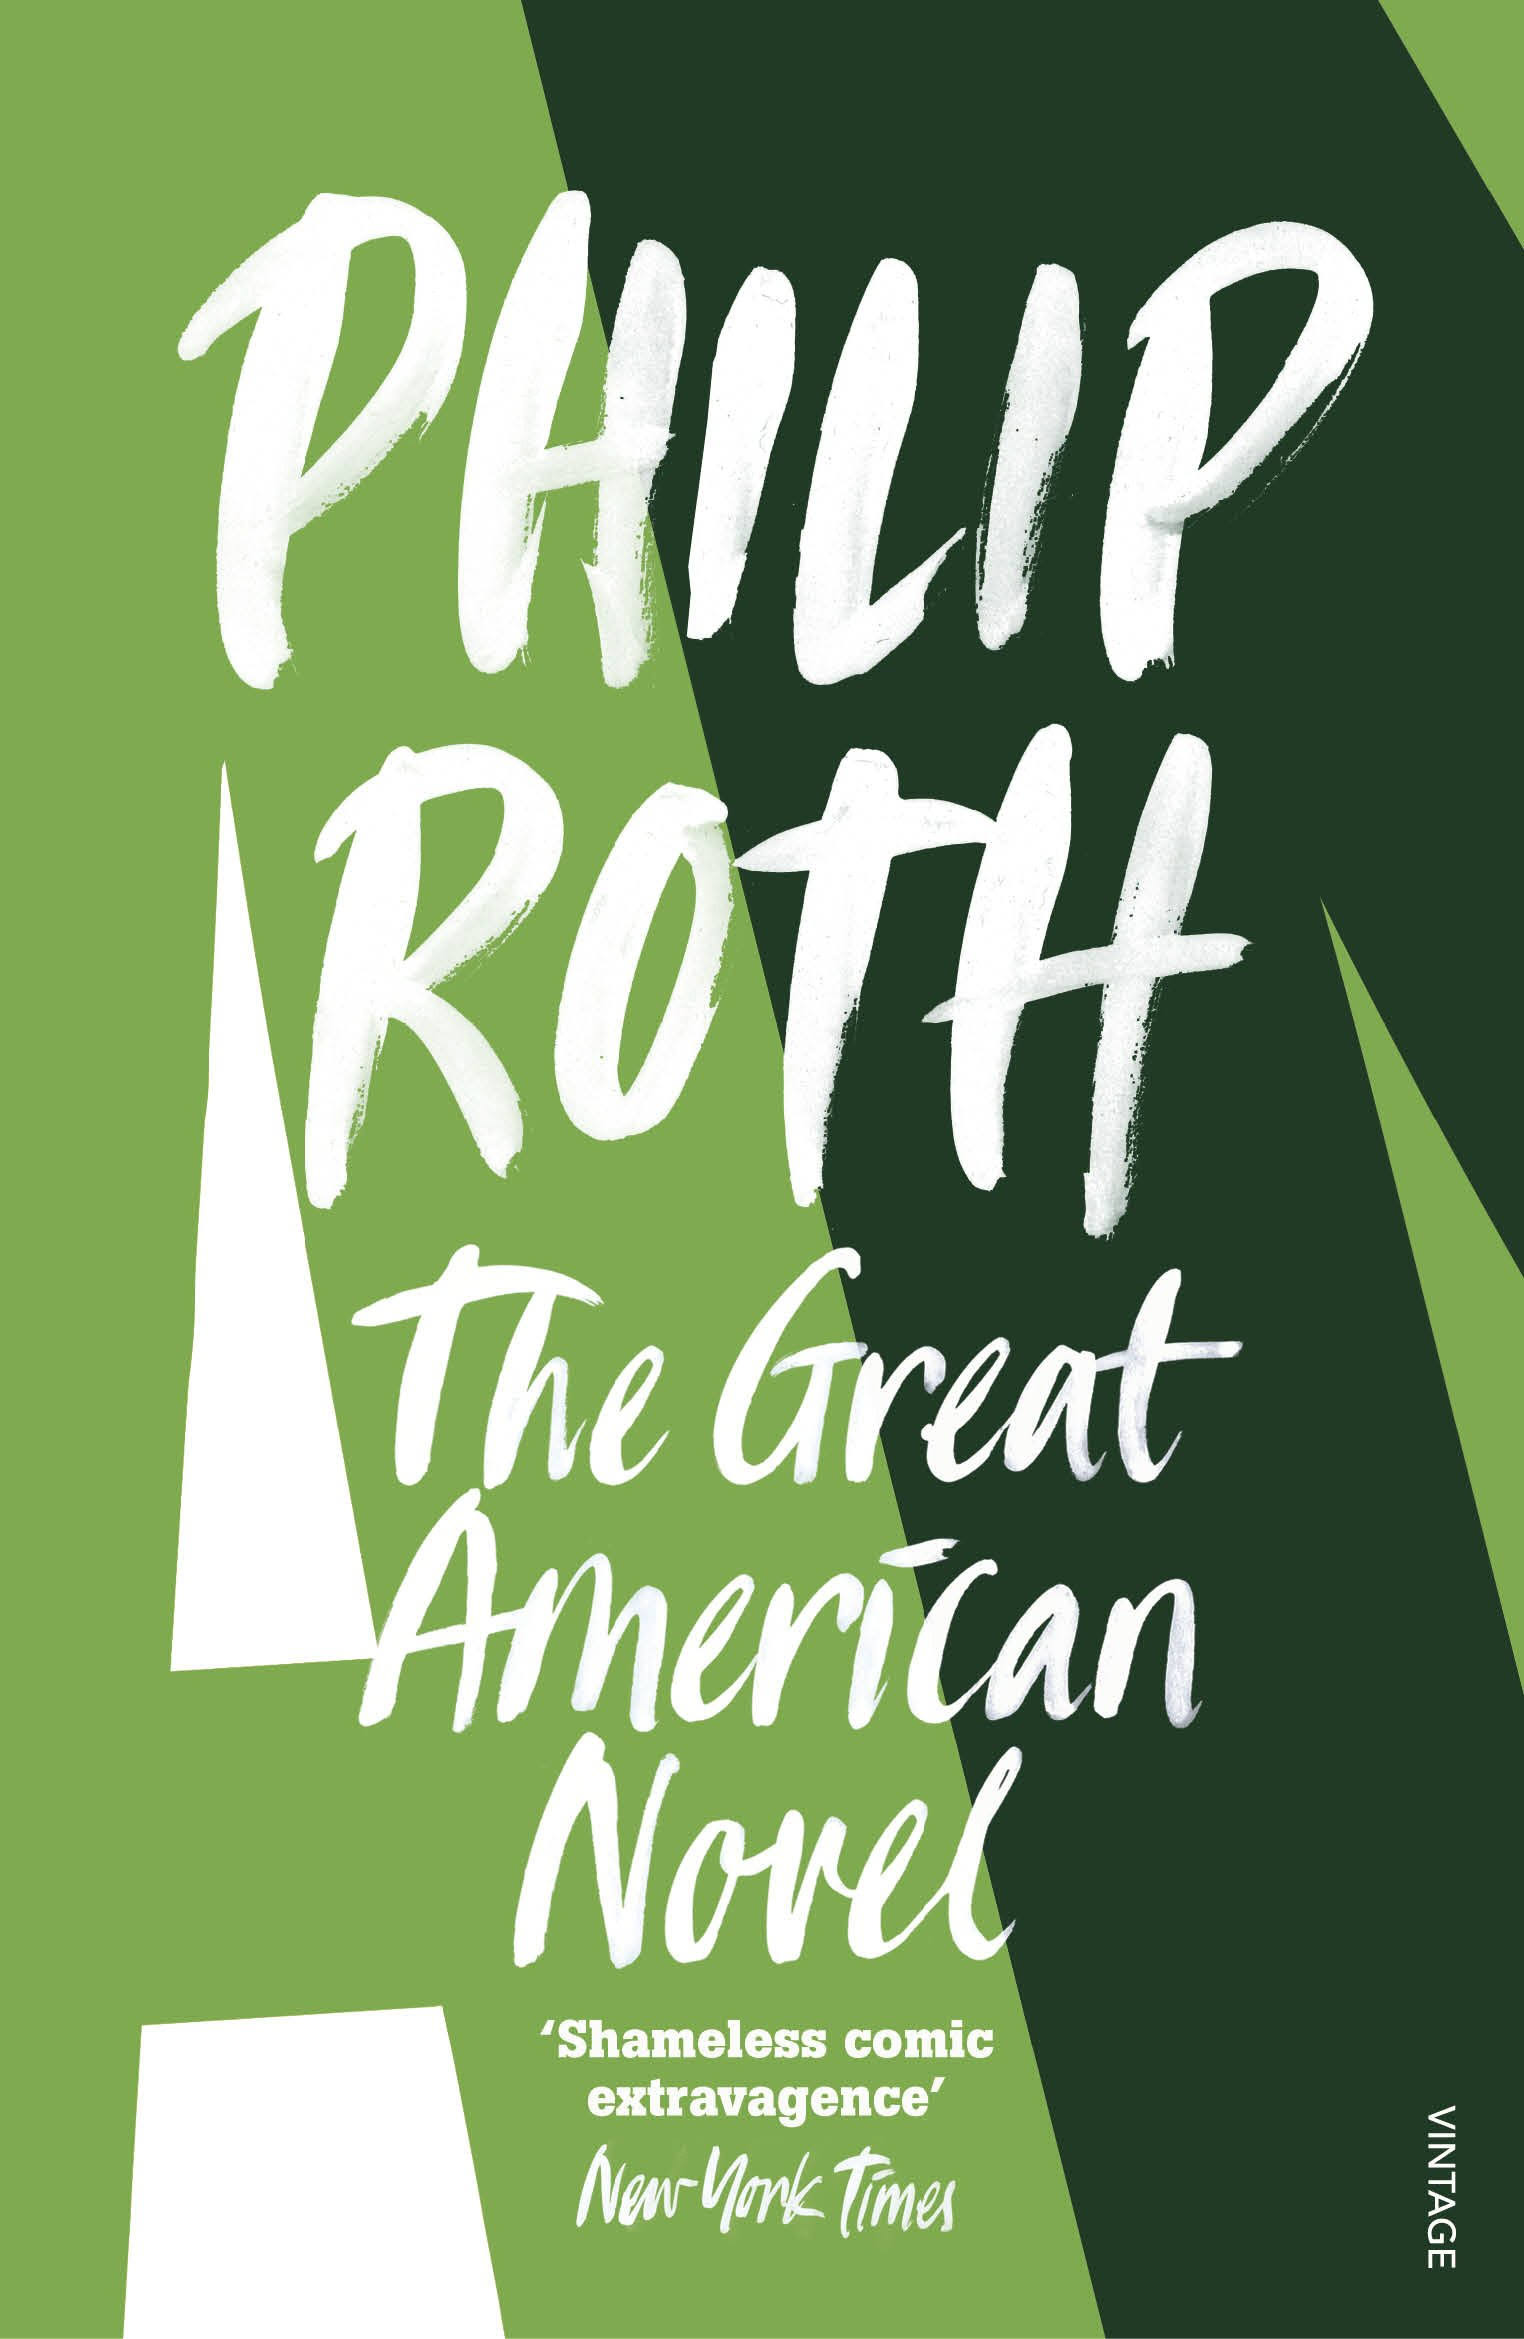 The Great American Novel [Book]